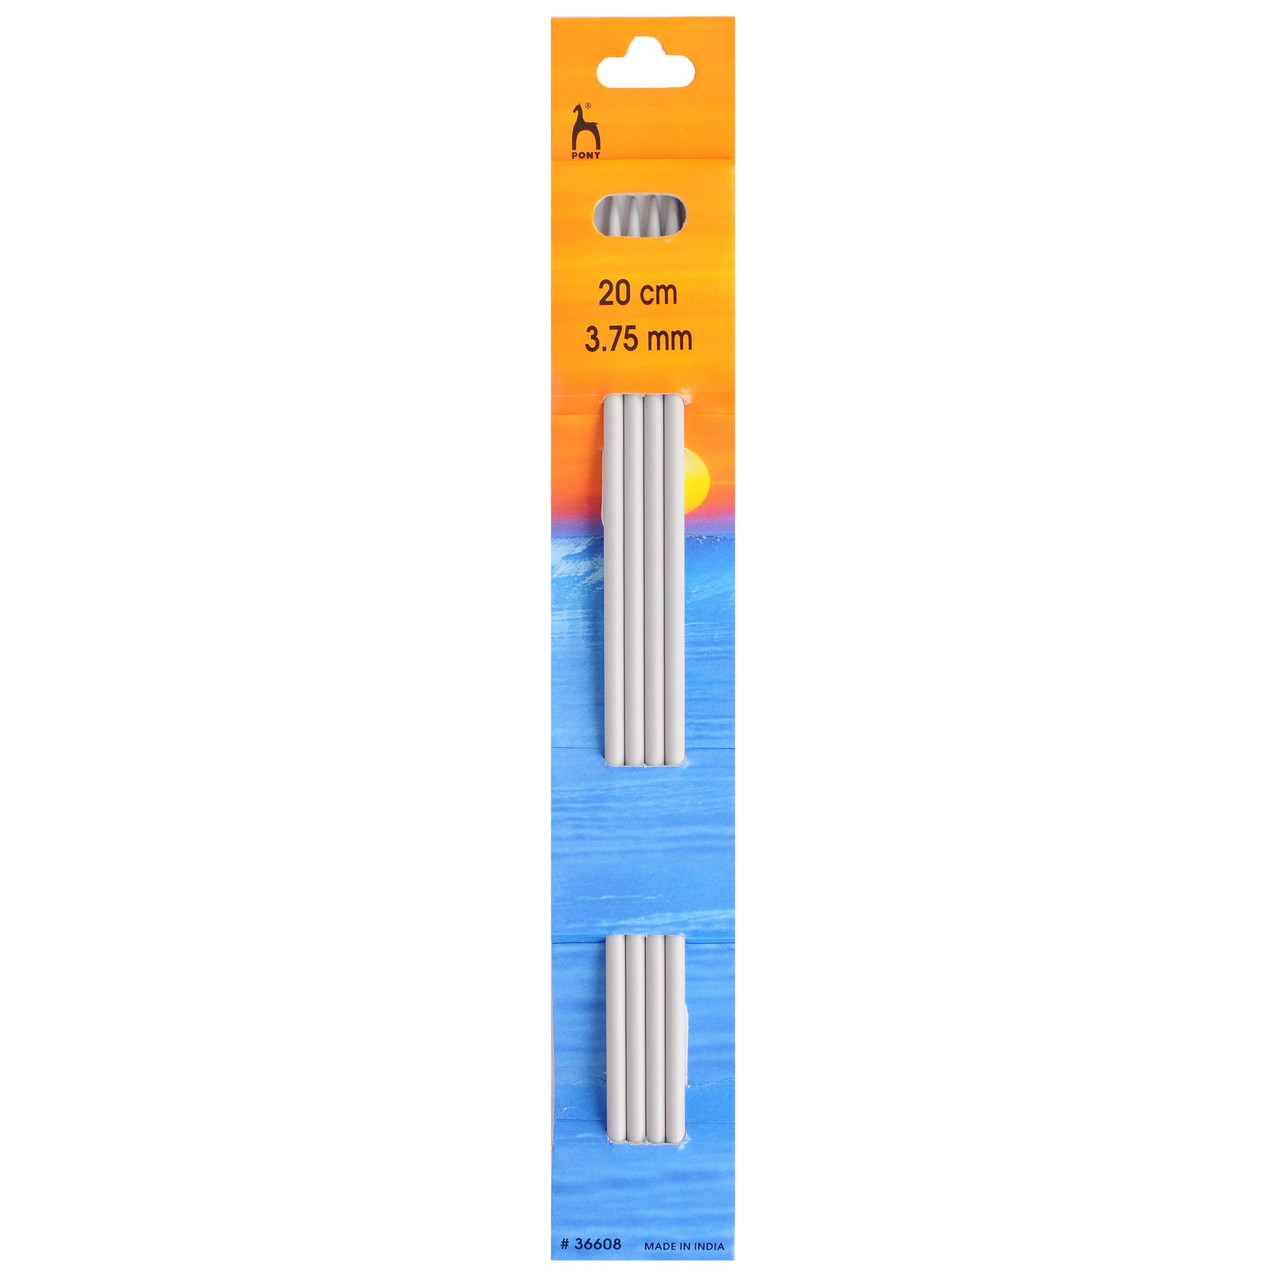 3.75mm Set of 4 Double-Ended Knitting Pins, 20cm length